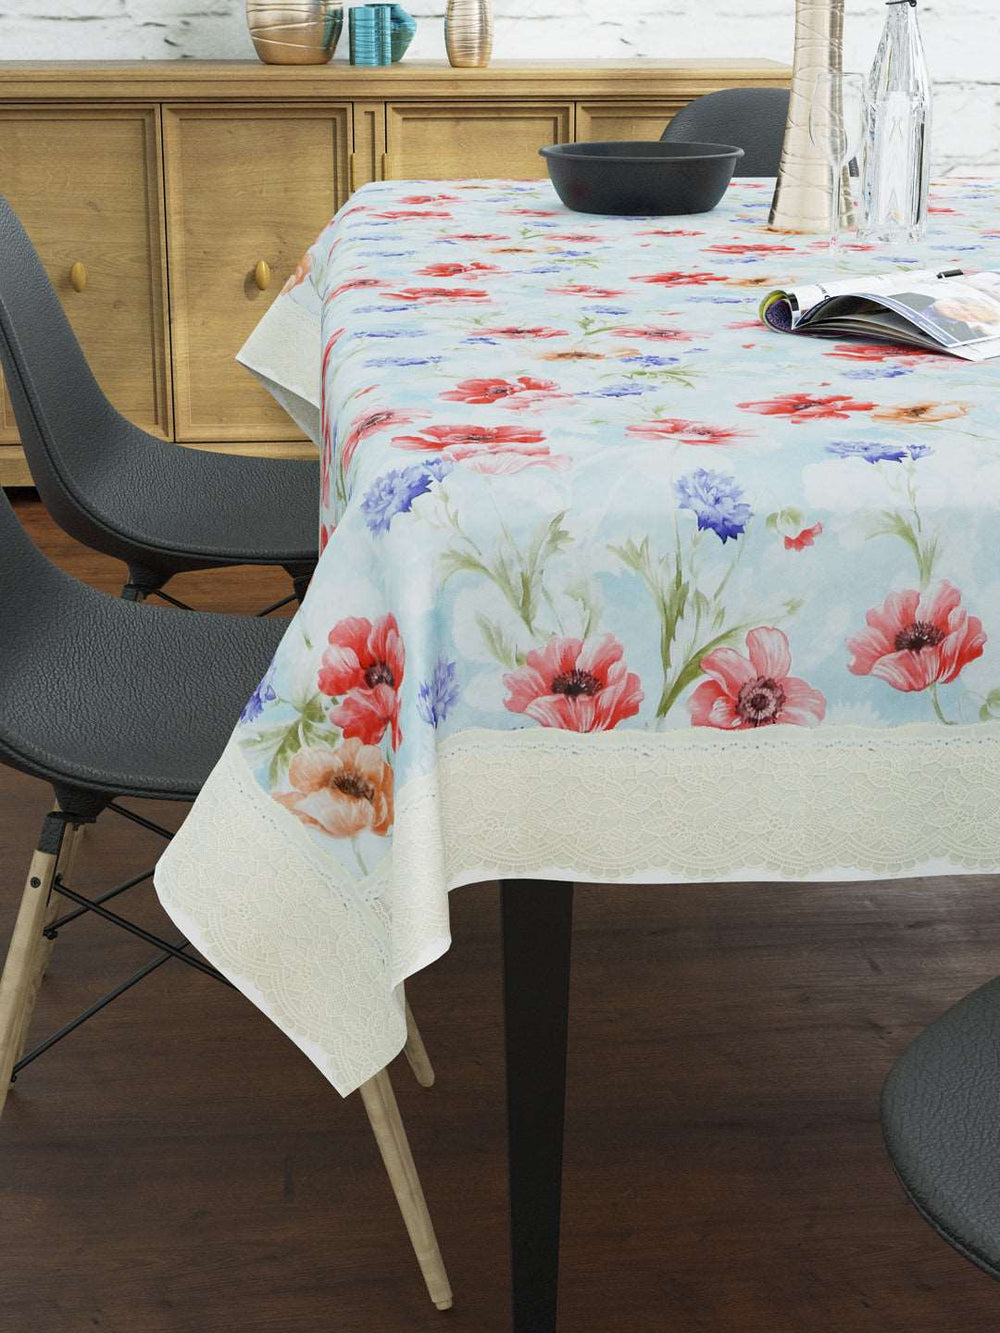 6 Seater Dining Table Cover; Material - PVC; Anti Slip; Red & Blue